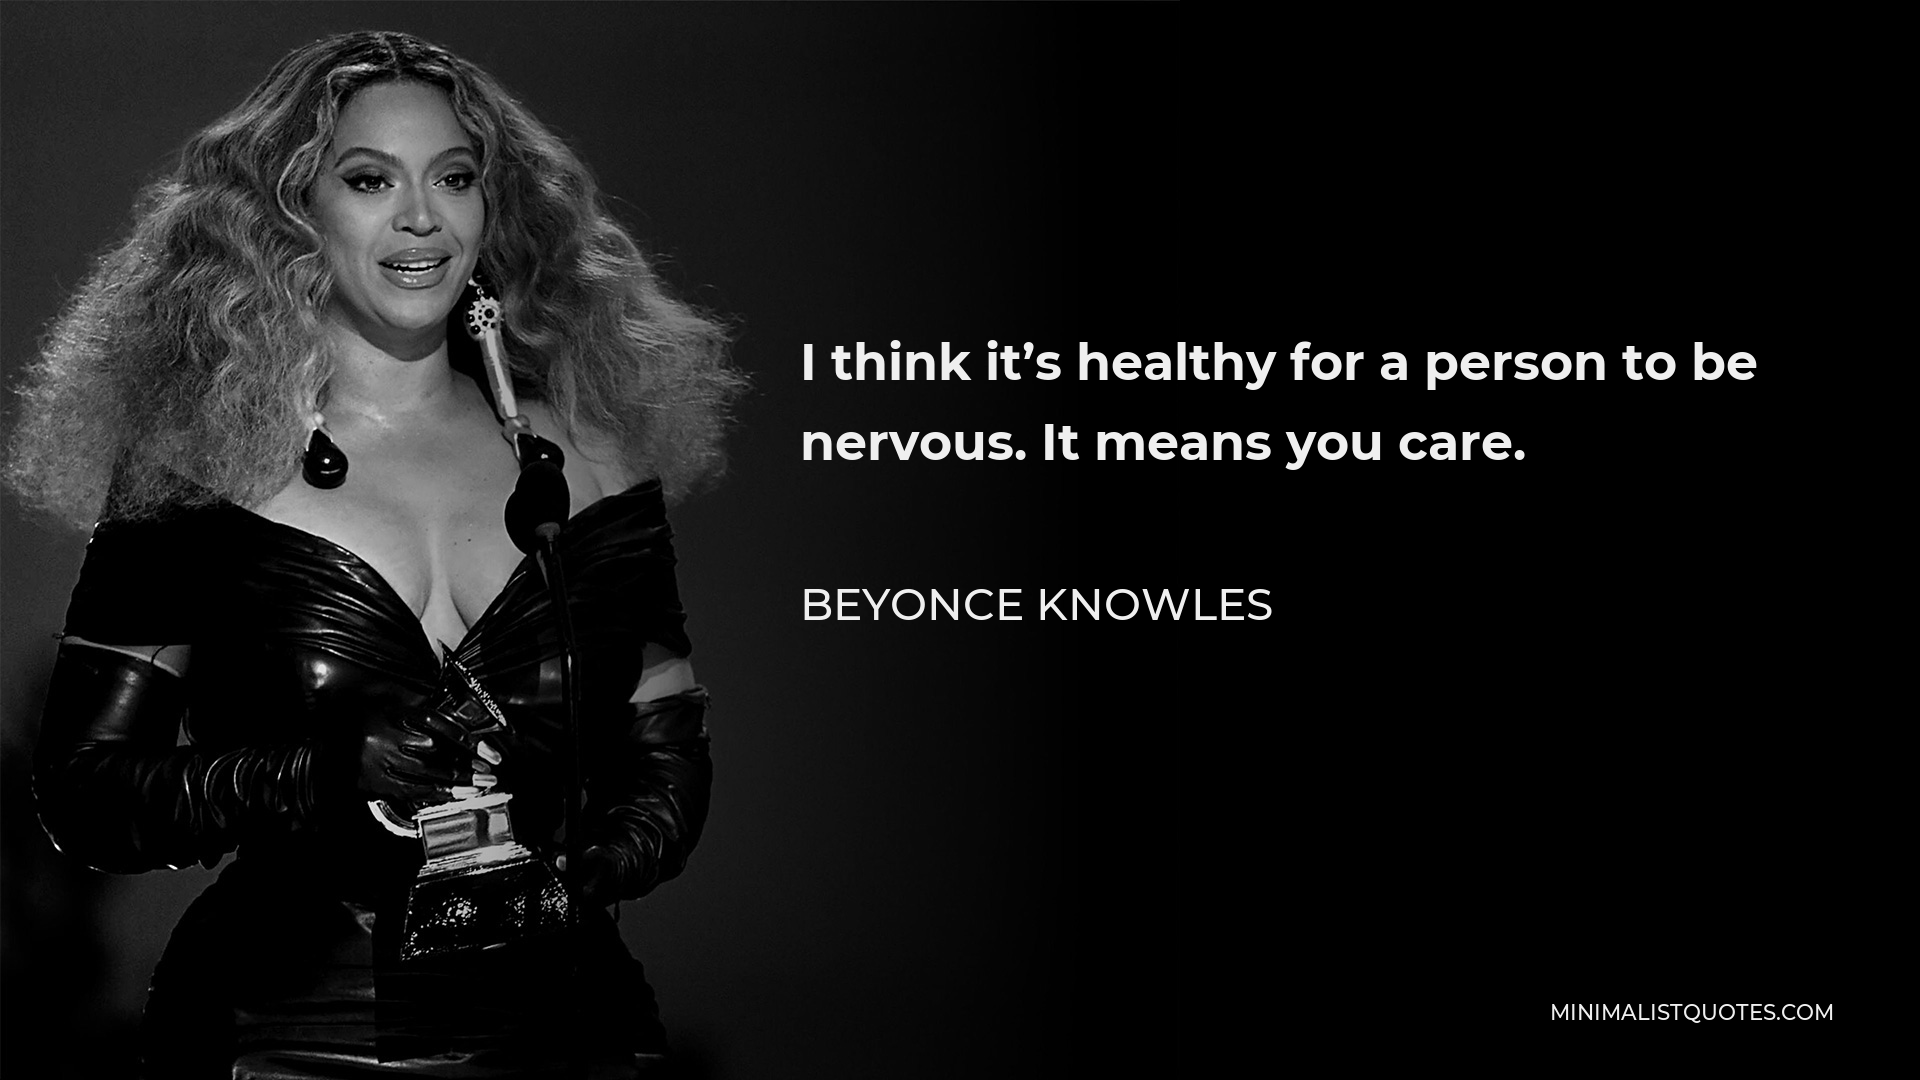 Beyonce Knowles Quote - I think it’s healthy for a person to be nervous. It means you care.